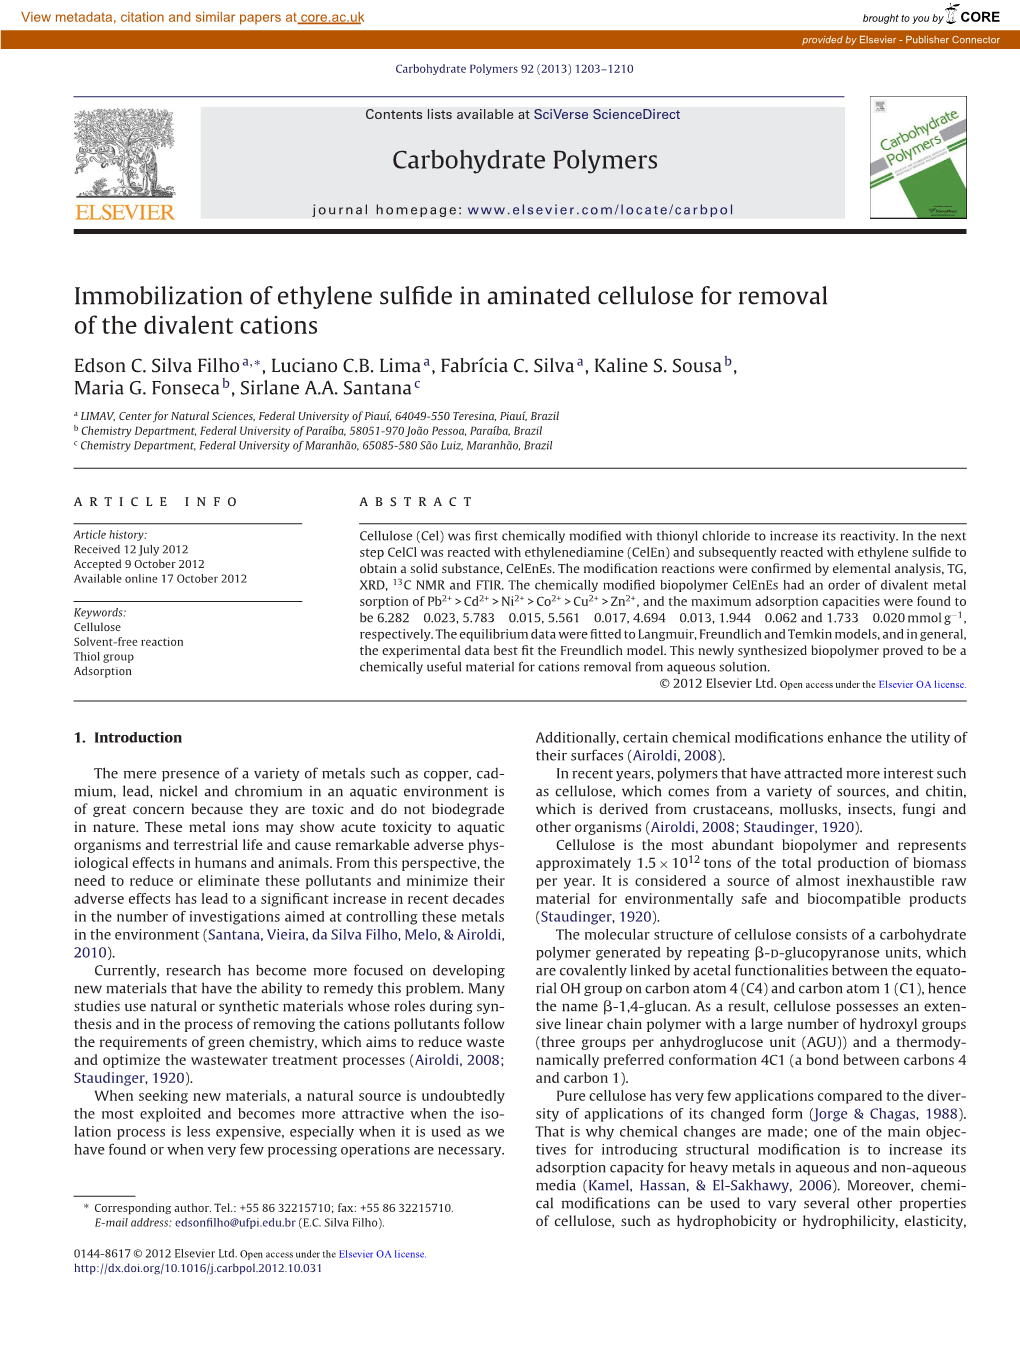 Immobilization of Ethylene Sulfide in Aminated Cellulose for Removal of the Divalent Cations